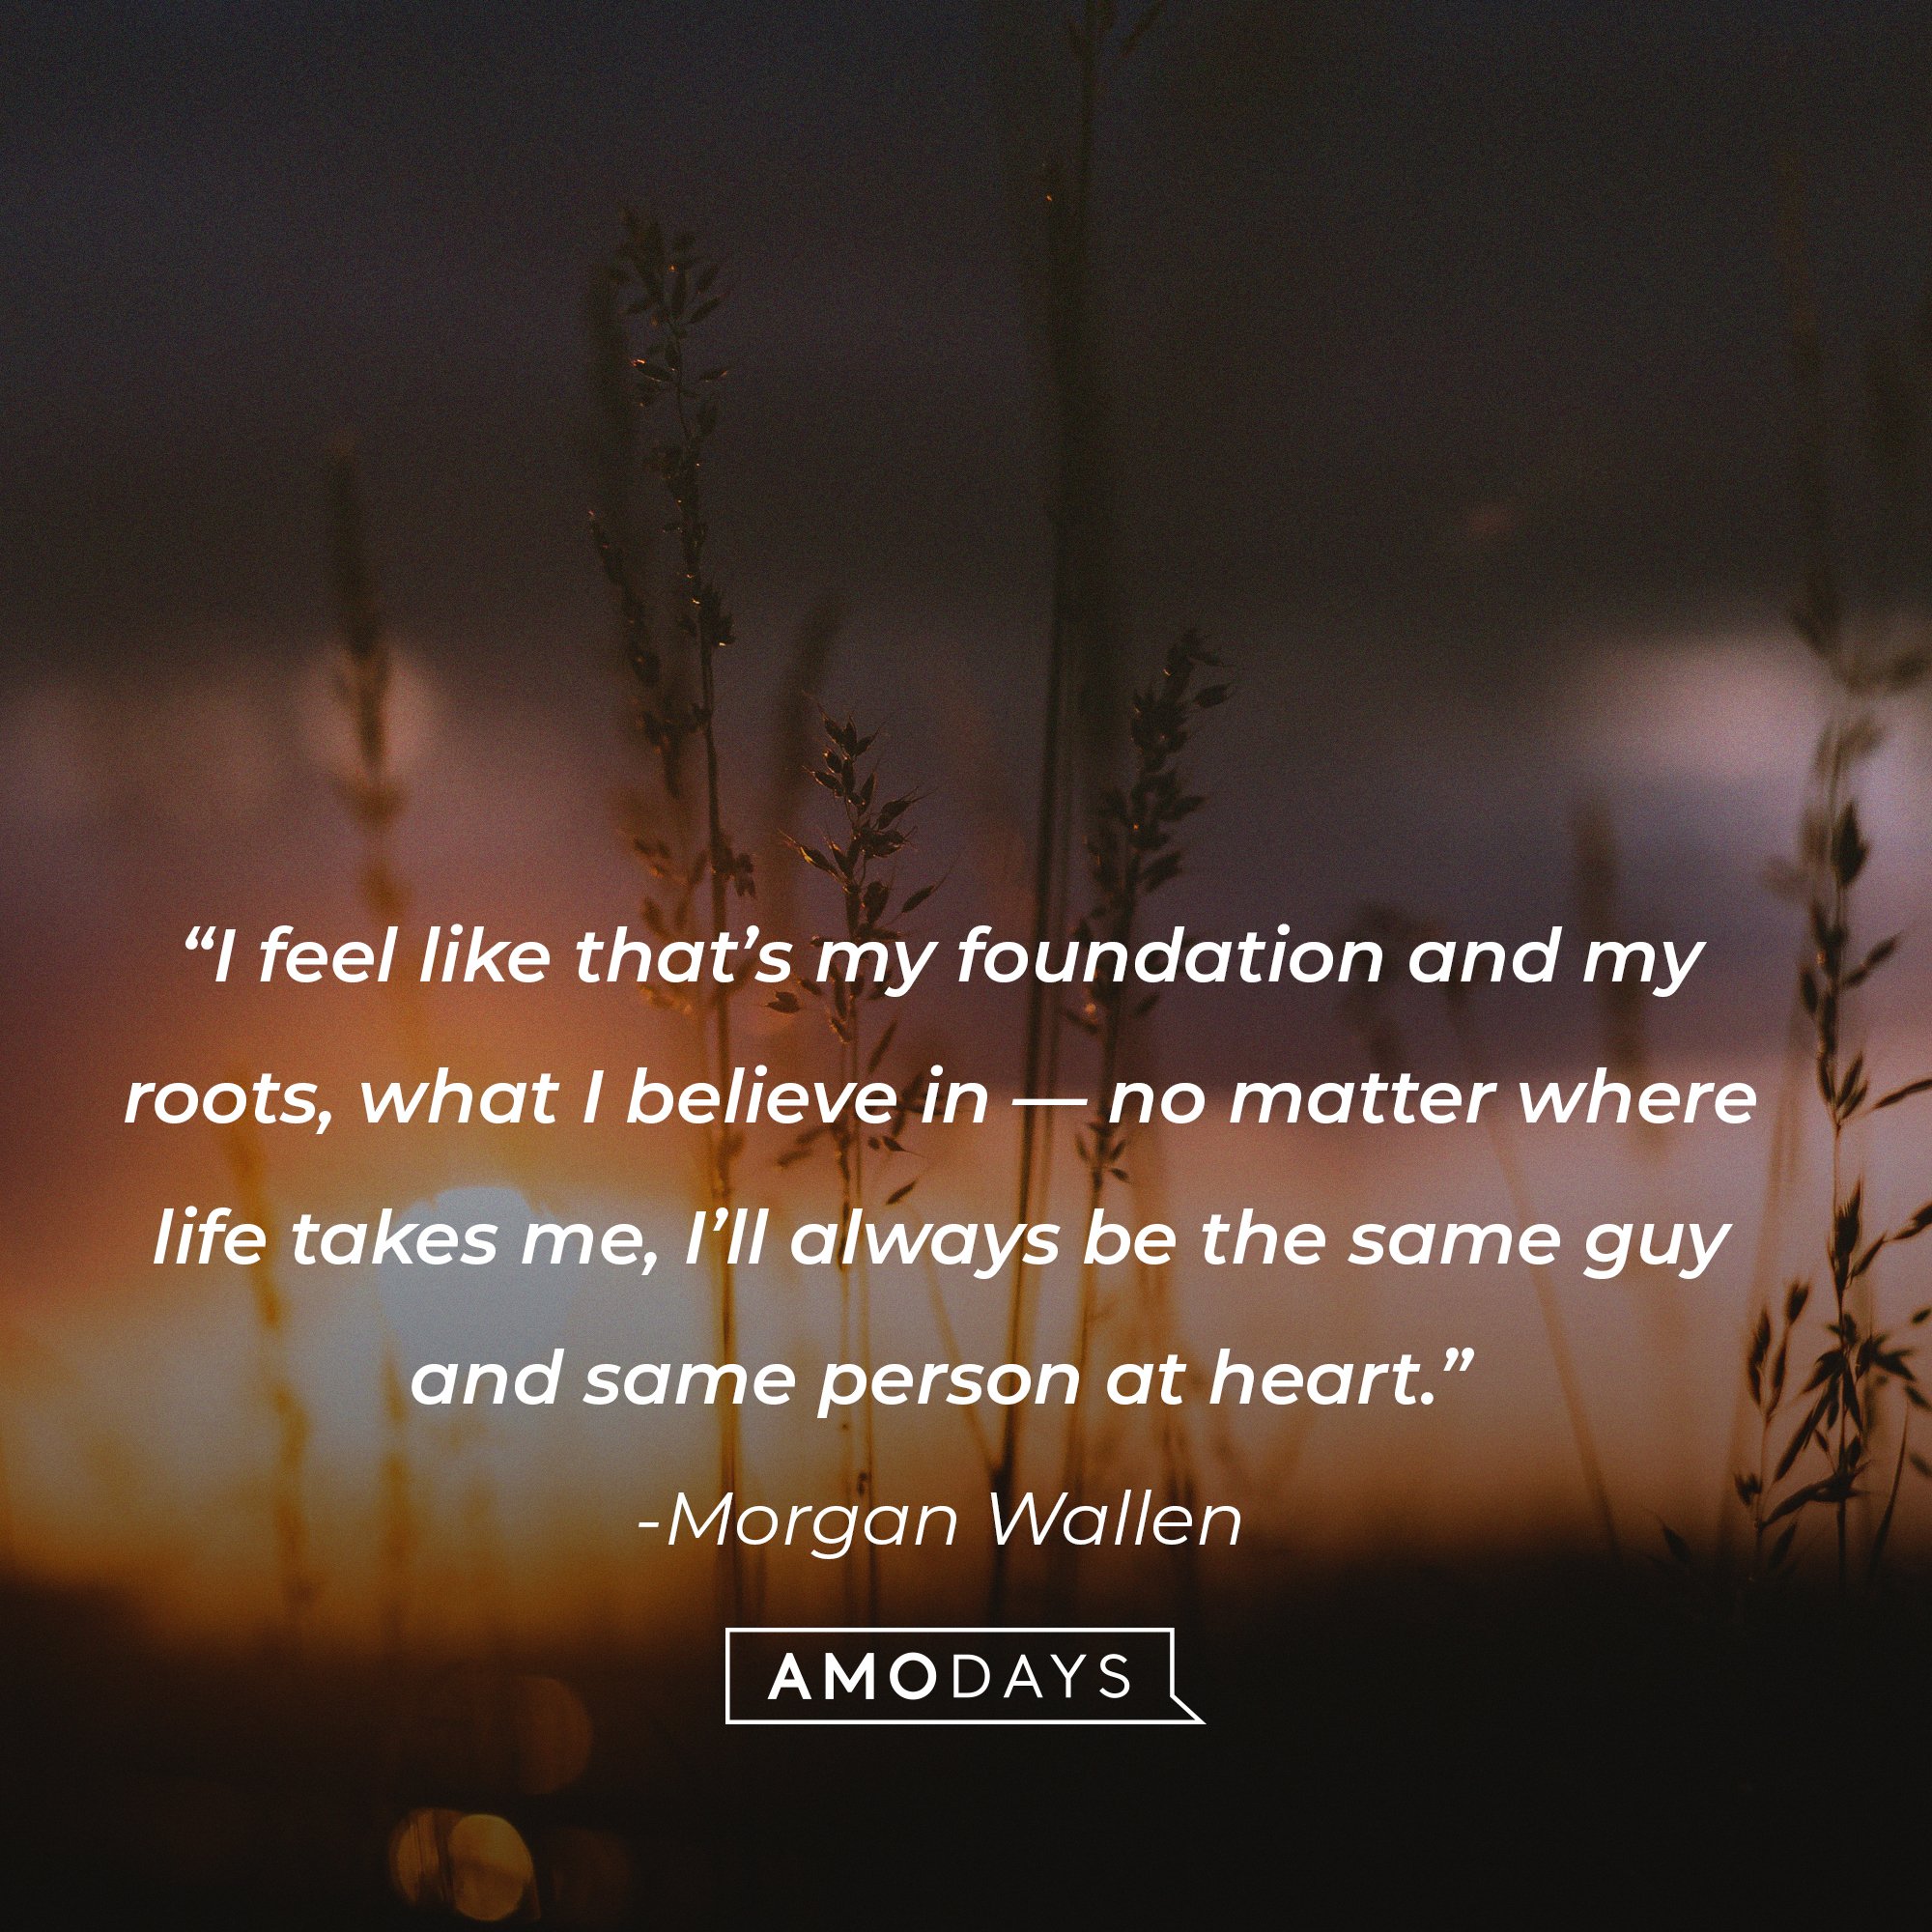  Morgan Wallen’s quote: "I feel like that's my foundation and my roots, what I believe in - no matter where life takes me, I'll always be the same guy and same person at heart." | Image: AmoDays|